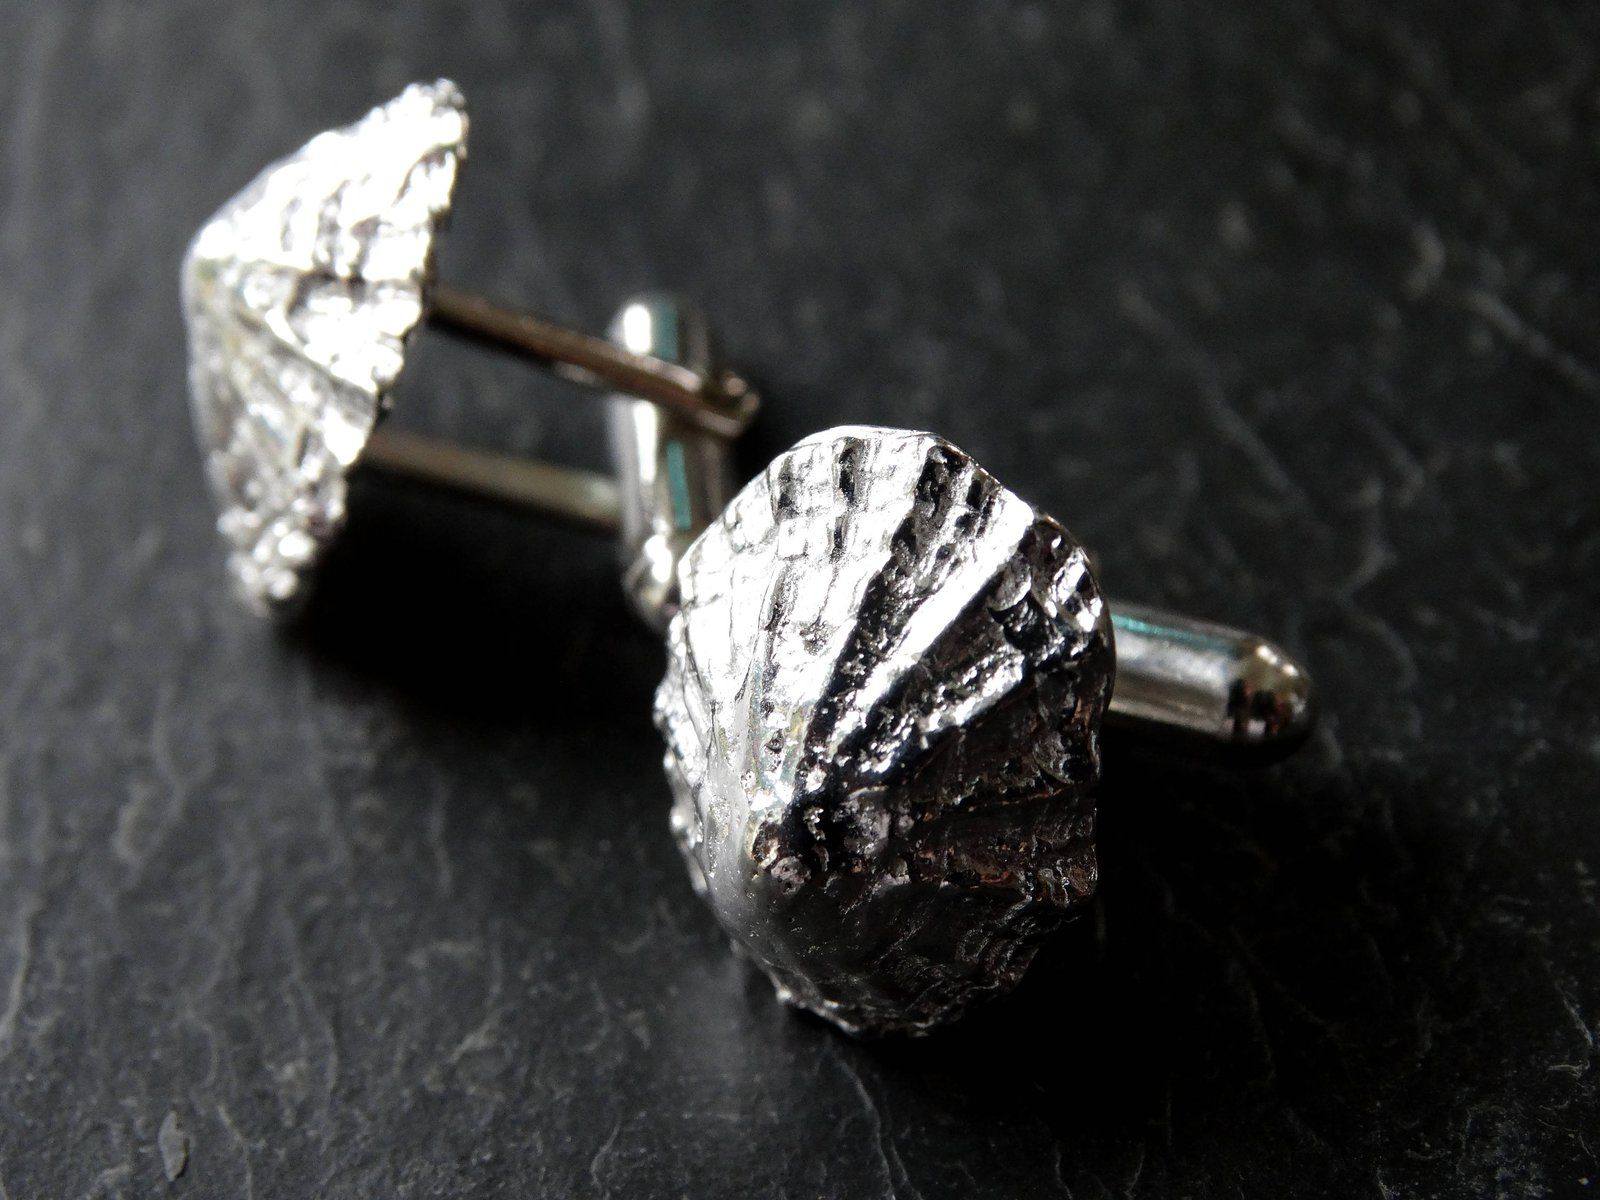 Silver limpet shell cuff links | cuff links | Louella Jewellery